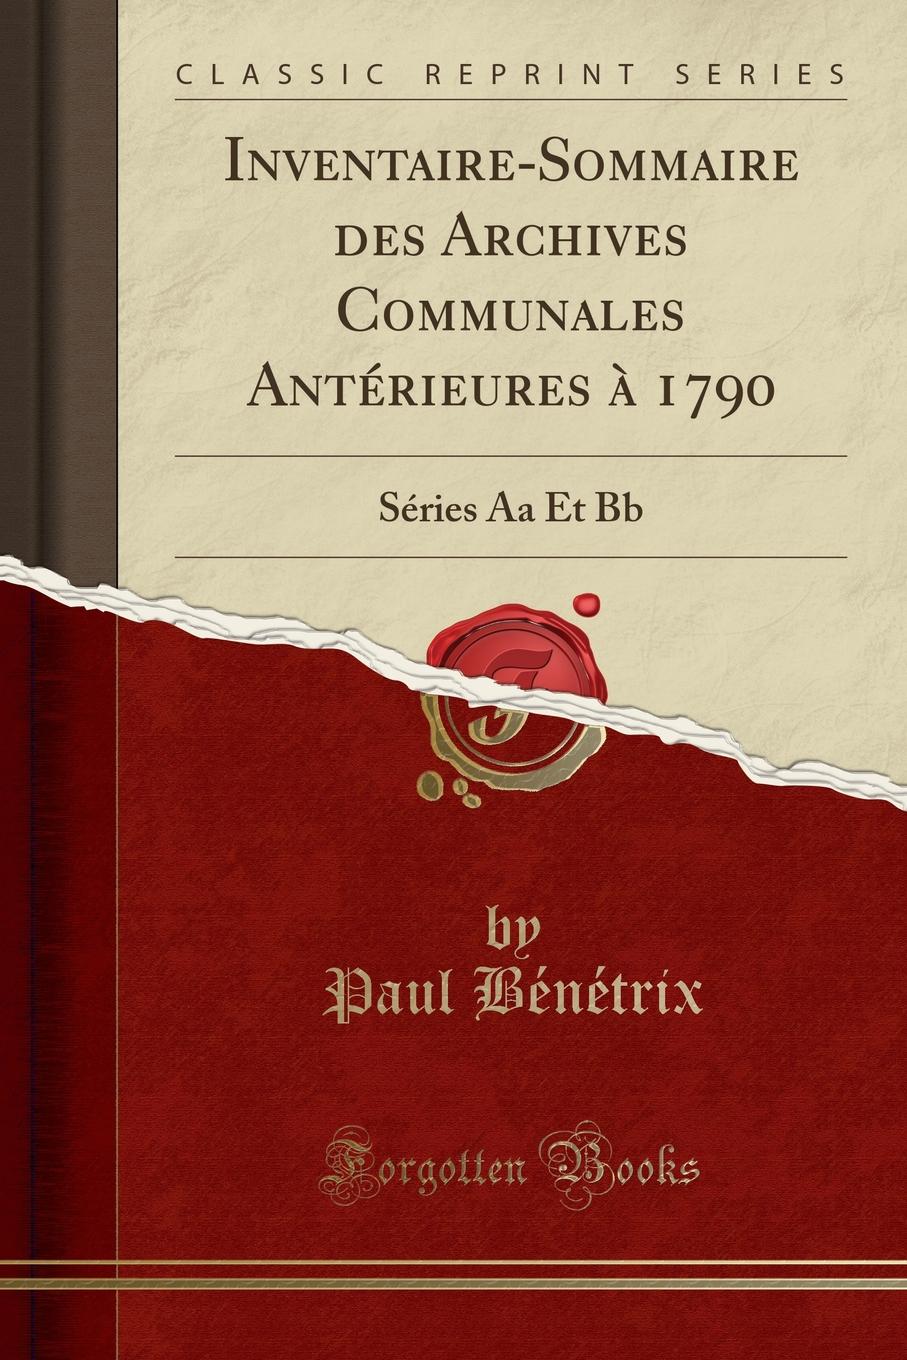 фото Inventaire-Sommaire des Archives Communales Anterieures a 1790. Series Aa Et Bb (Classic Reprint)